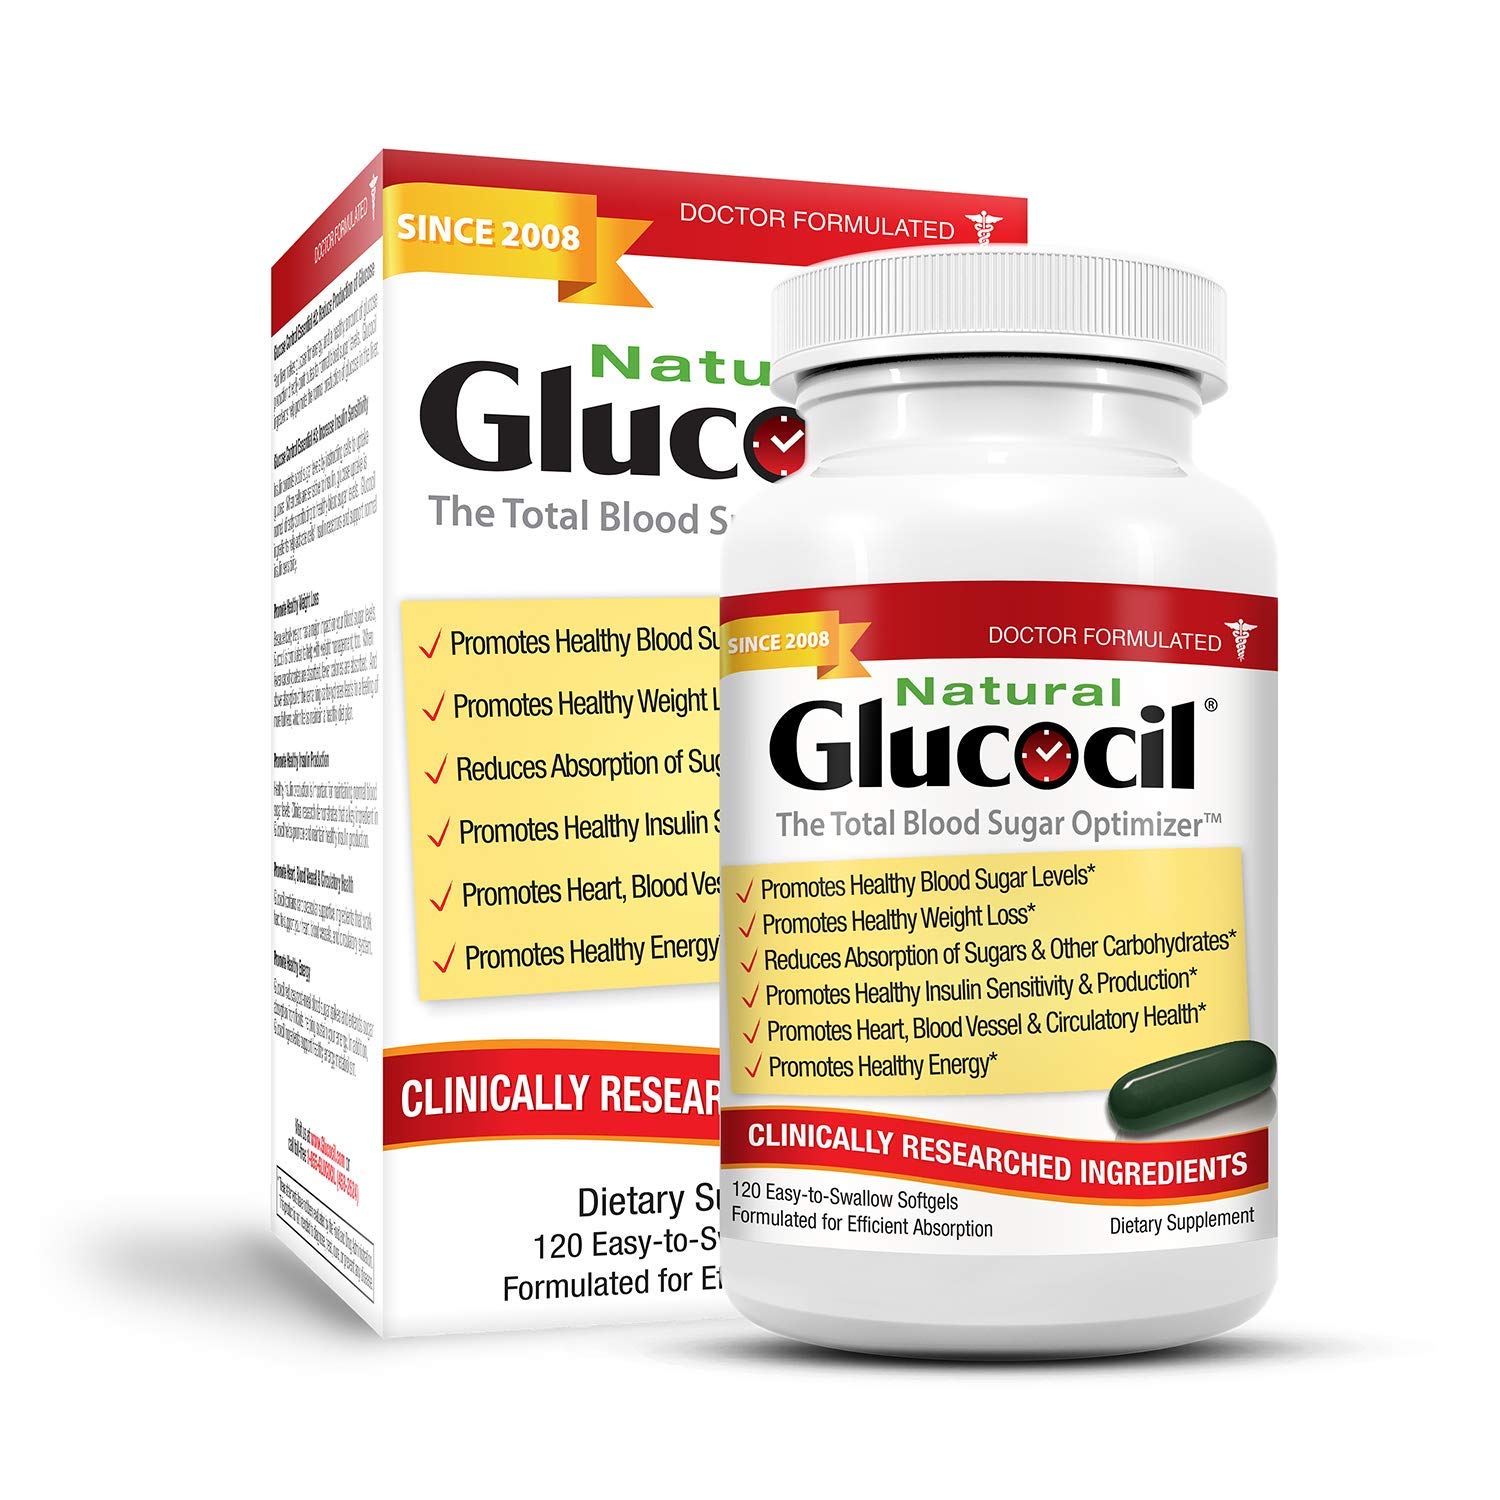 Review of Glucocil - Promotes Normal Blood Sugar Levels Naturally